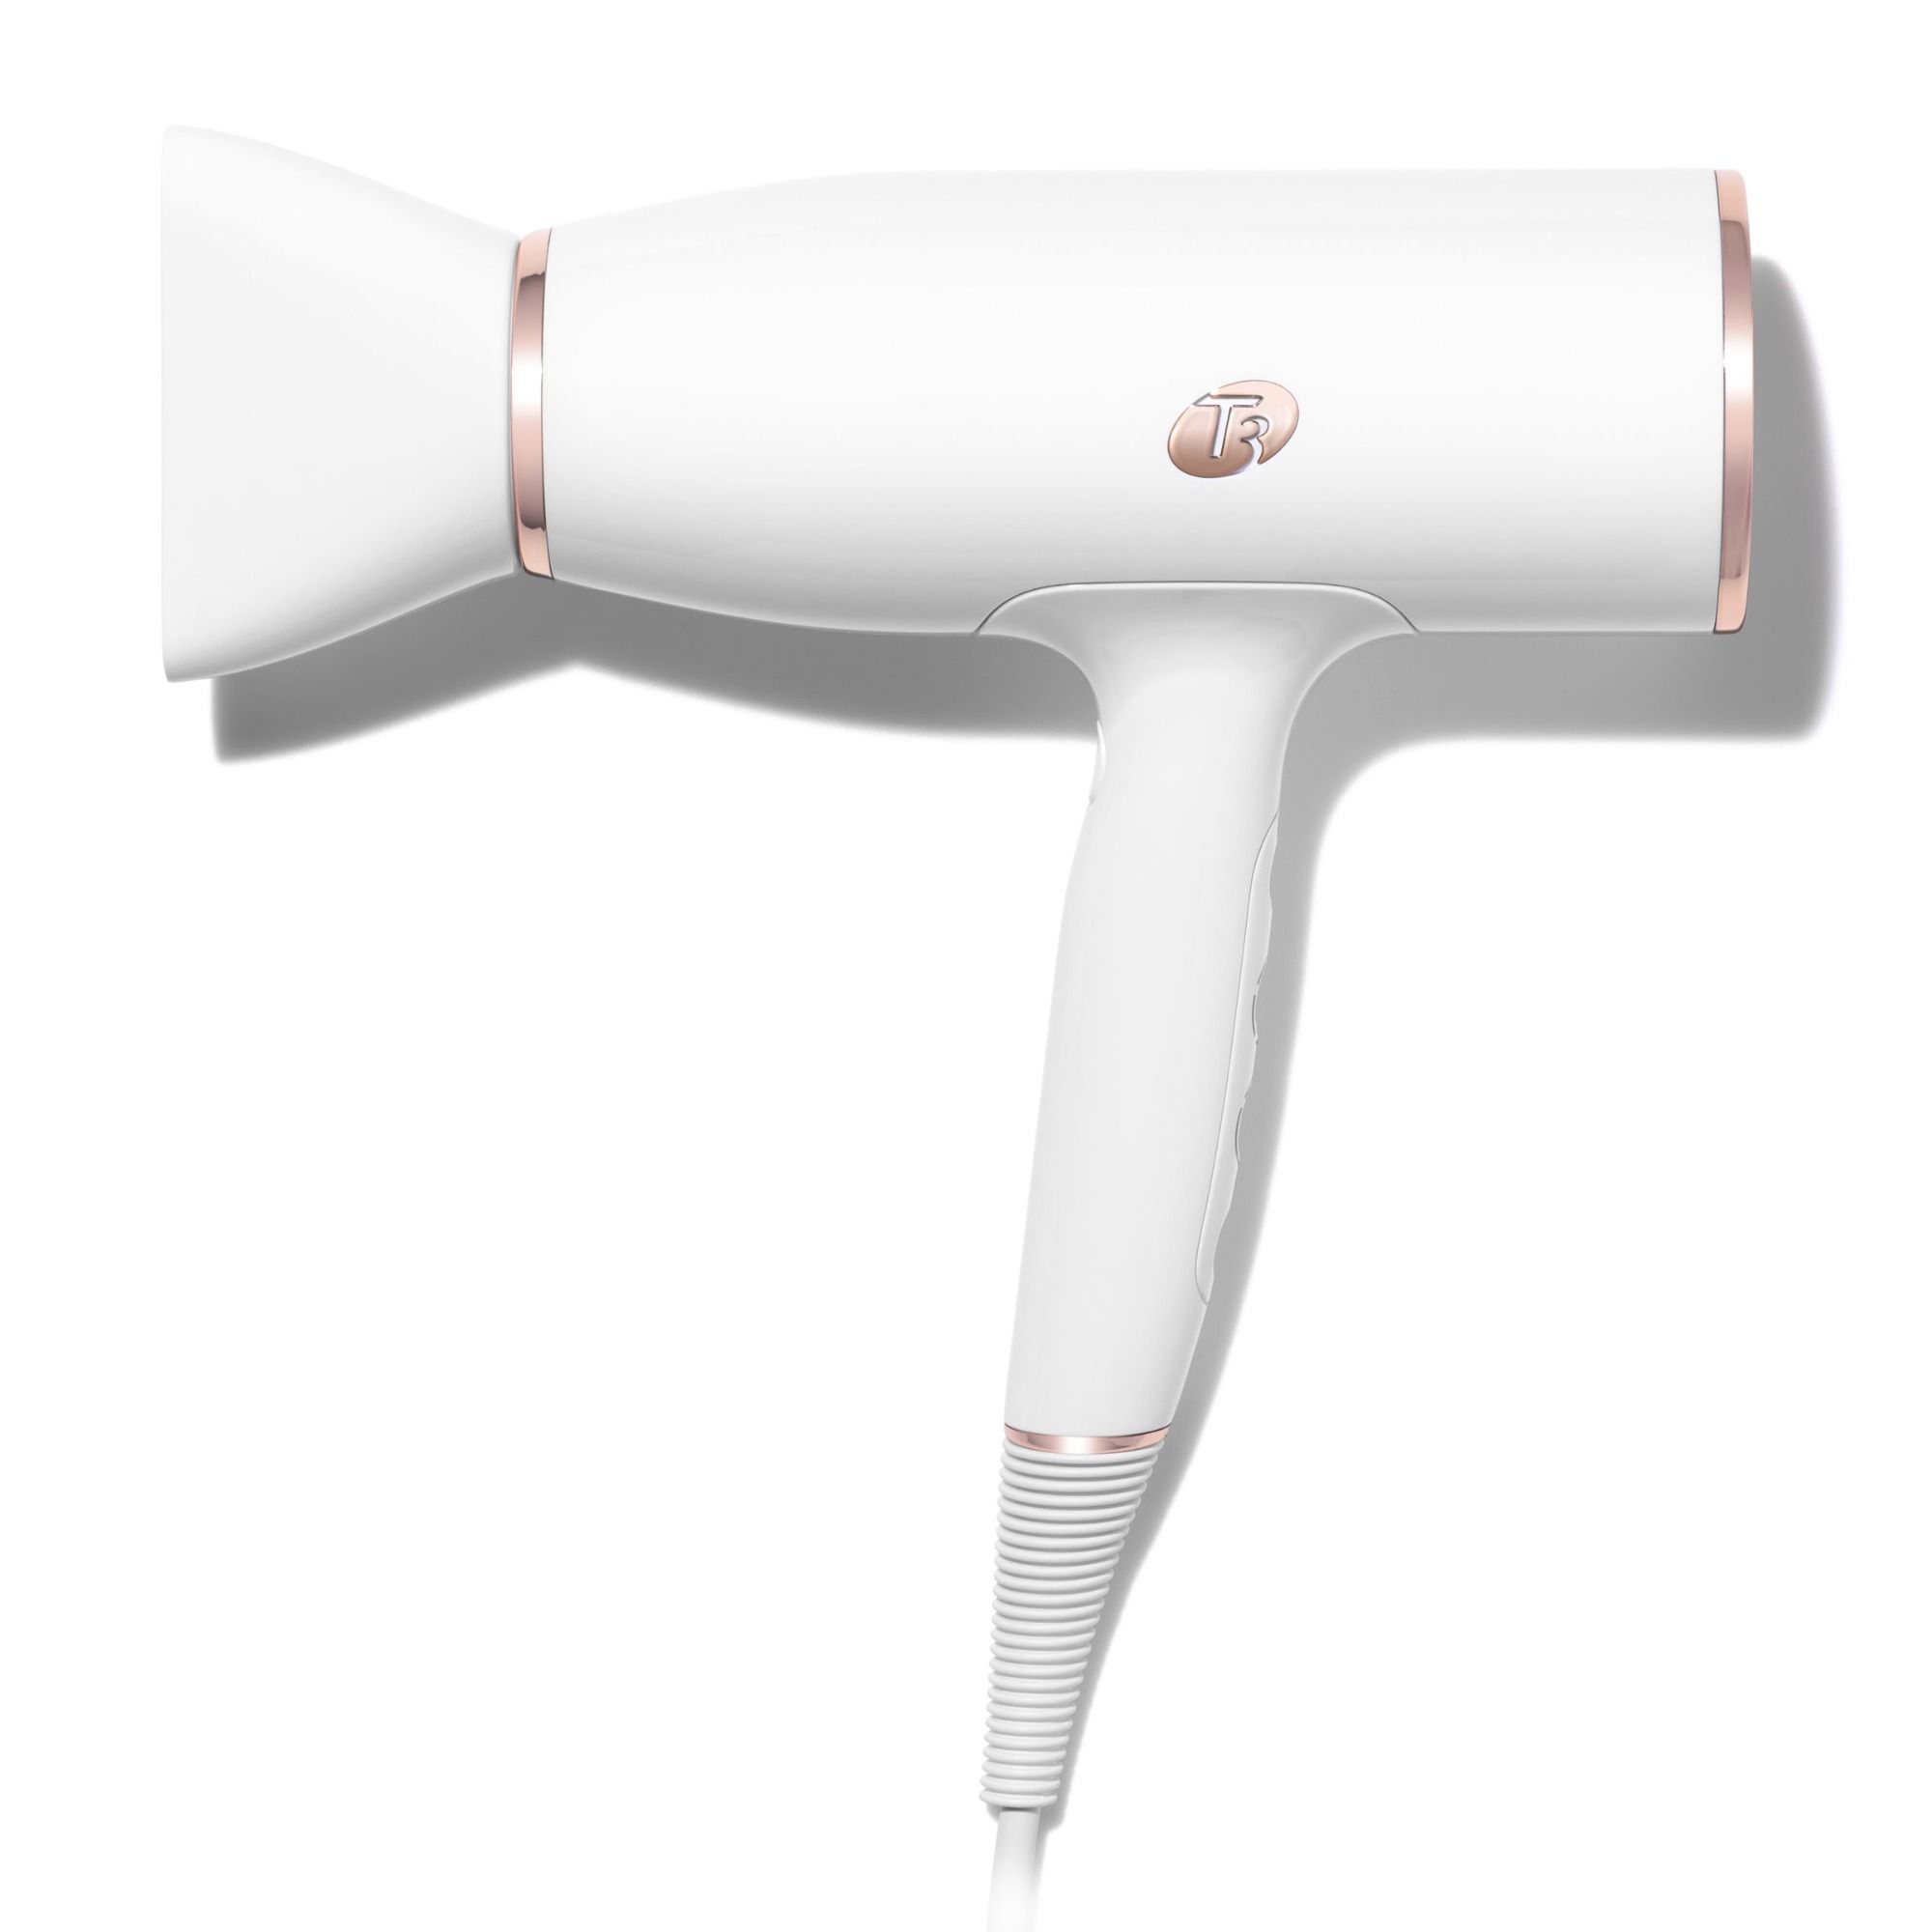 T3 Cura LUXE Hair Dryer | Digital Ionic Professional Blow Dryer | Frizz Smoothing | Fast Drying Wide Air Flow | Volume Booster | Auto Pause Sensor | Multiple Speed and Heat Settings | Cool Shot